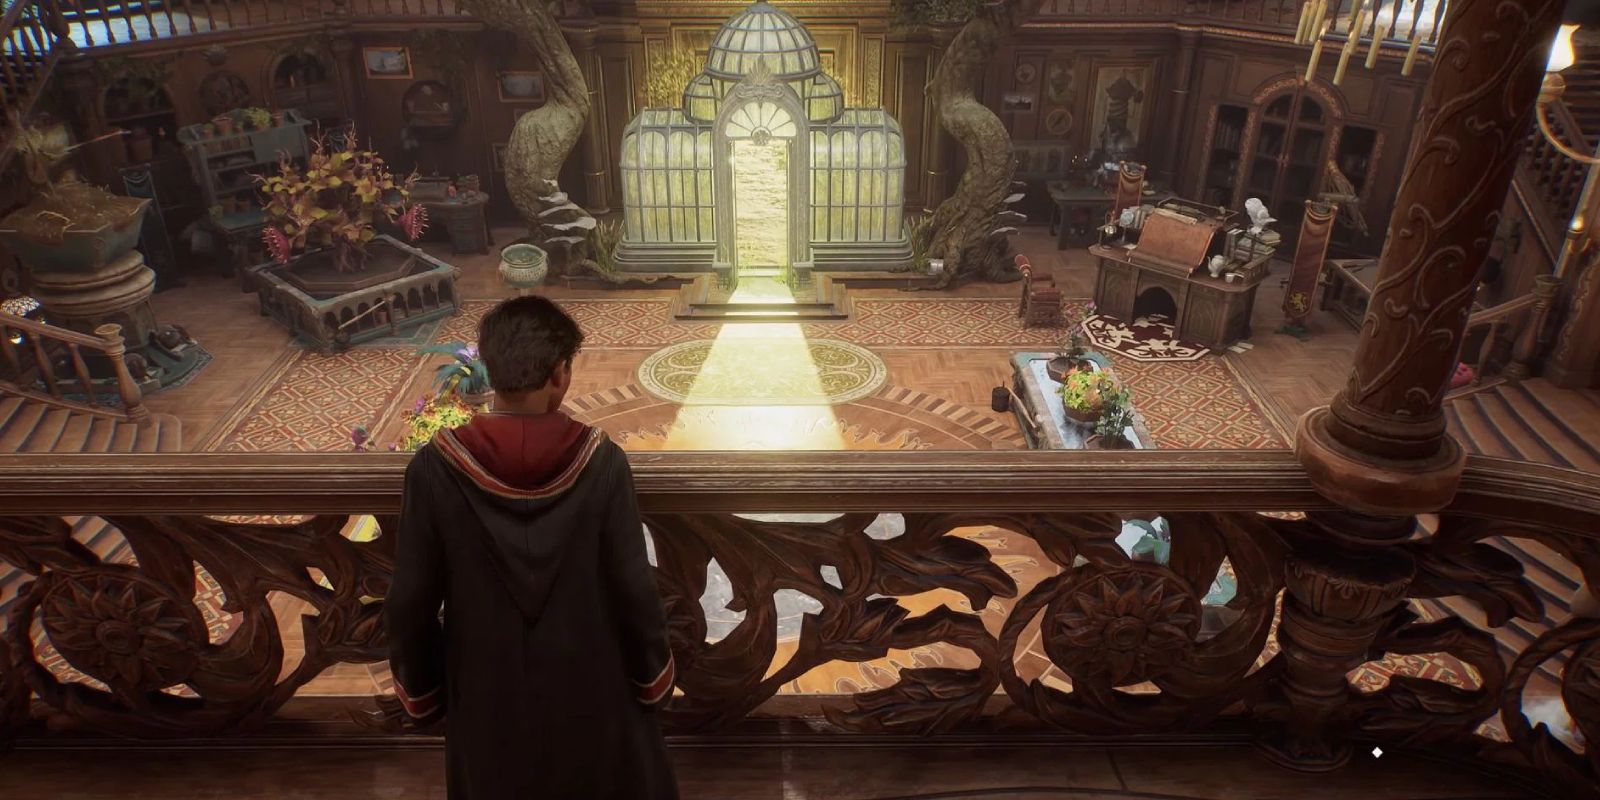 The protagonist of Hogwarts Legacy in the Room of Requirement where a variety of stations seem to be set up for many game purposes.